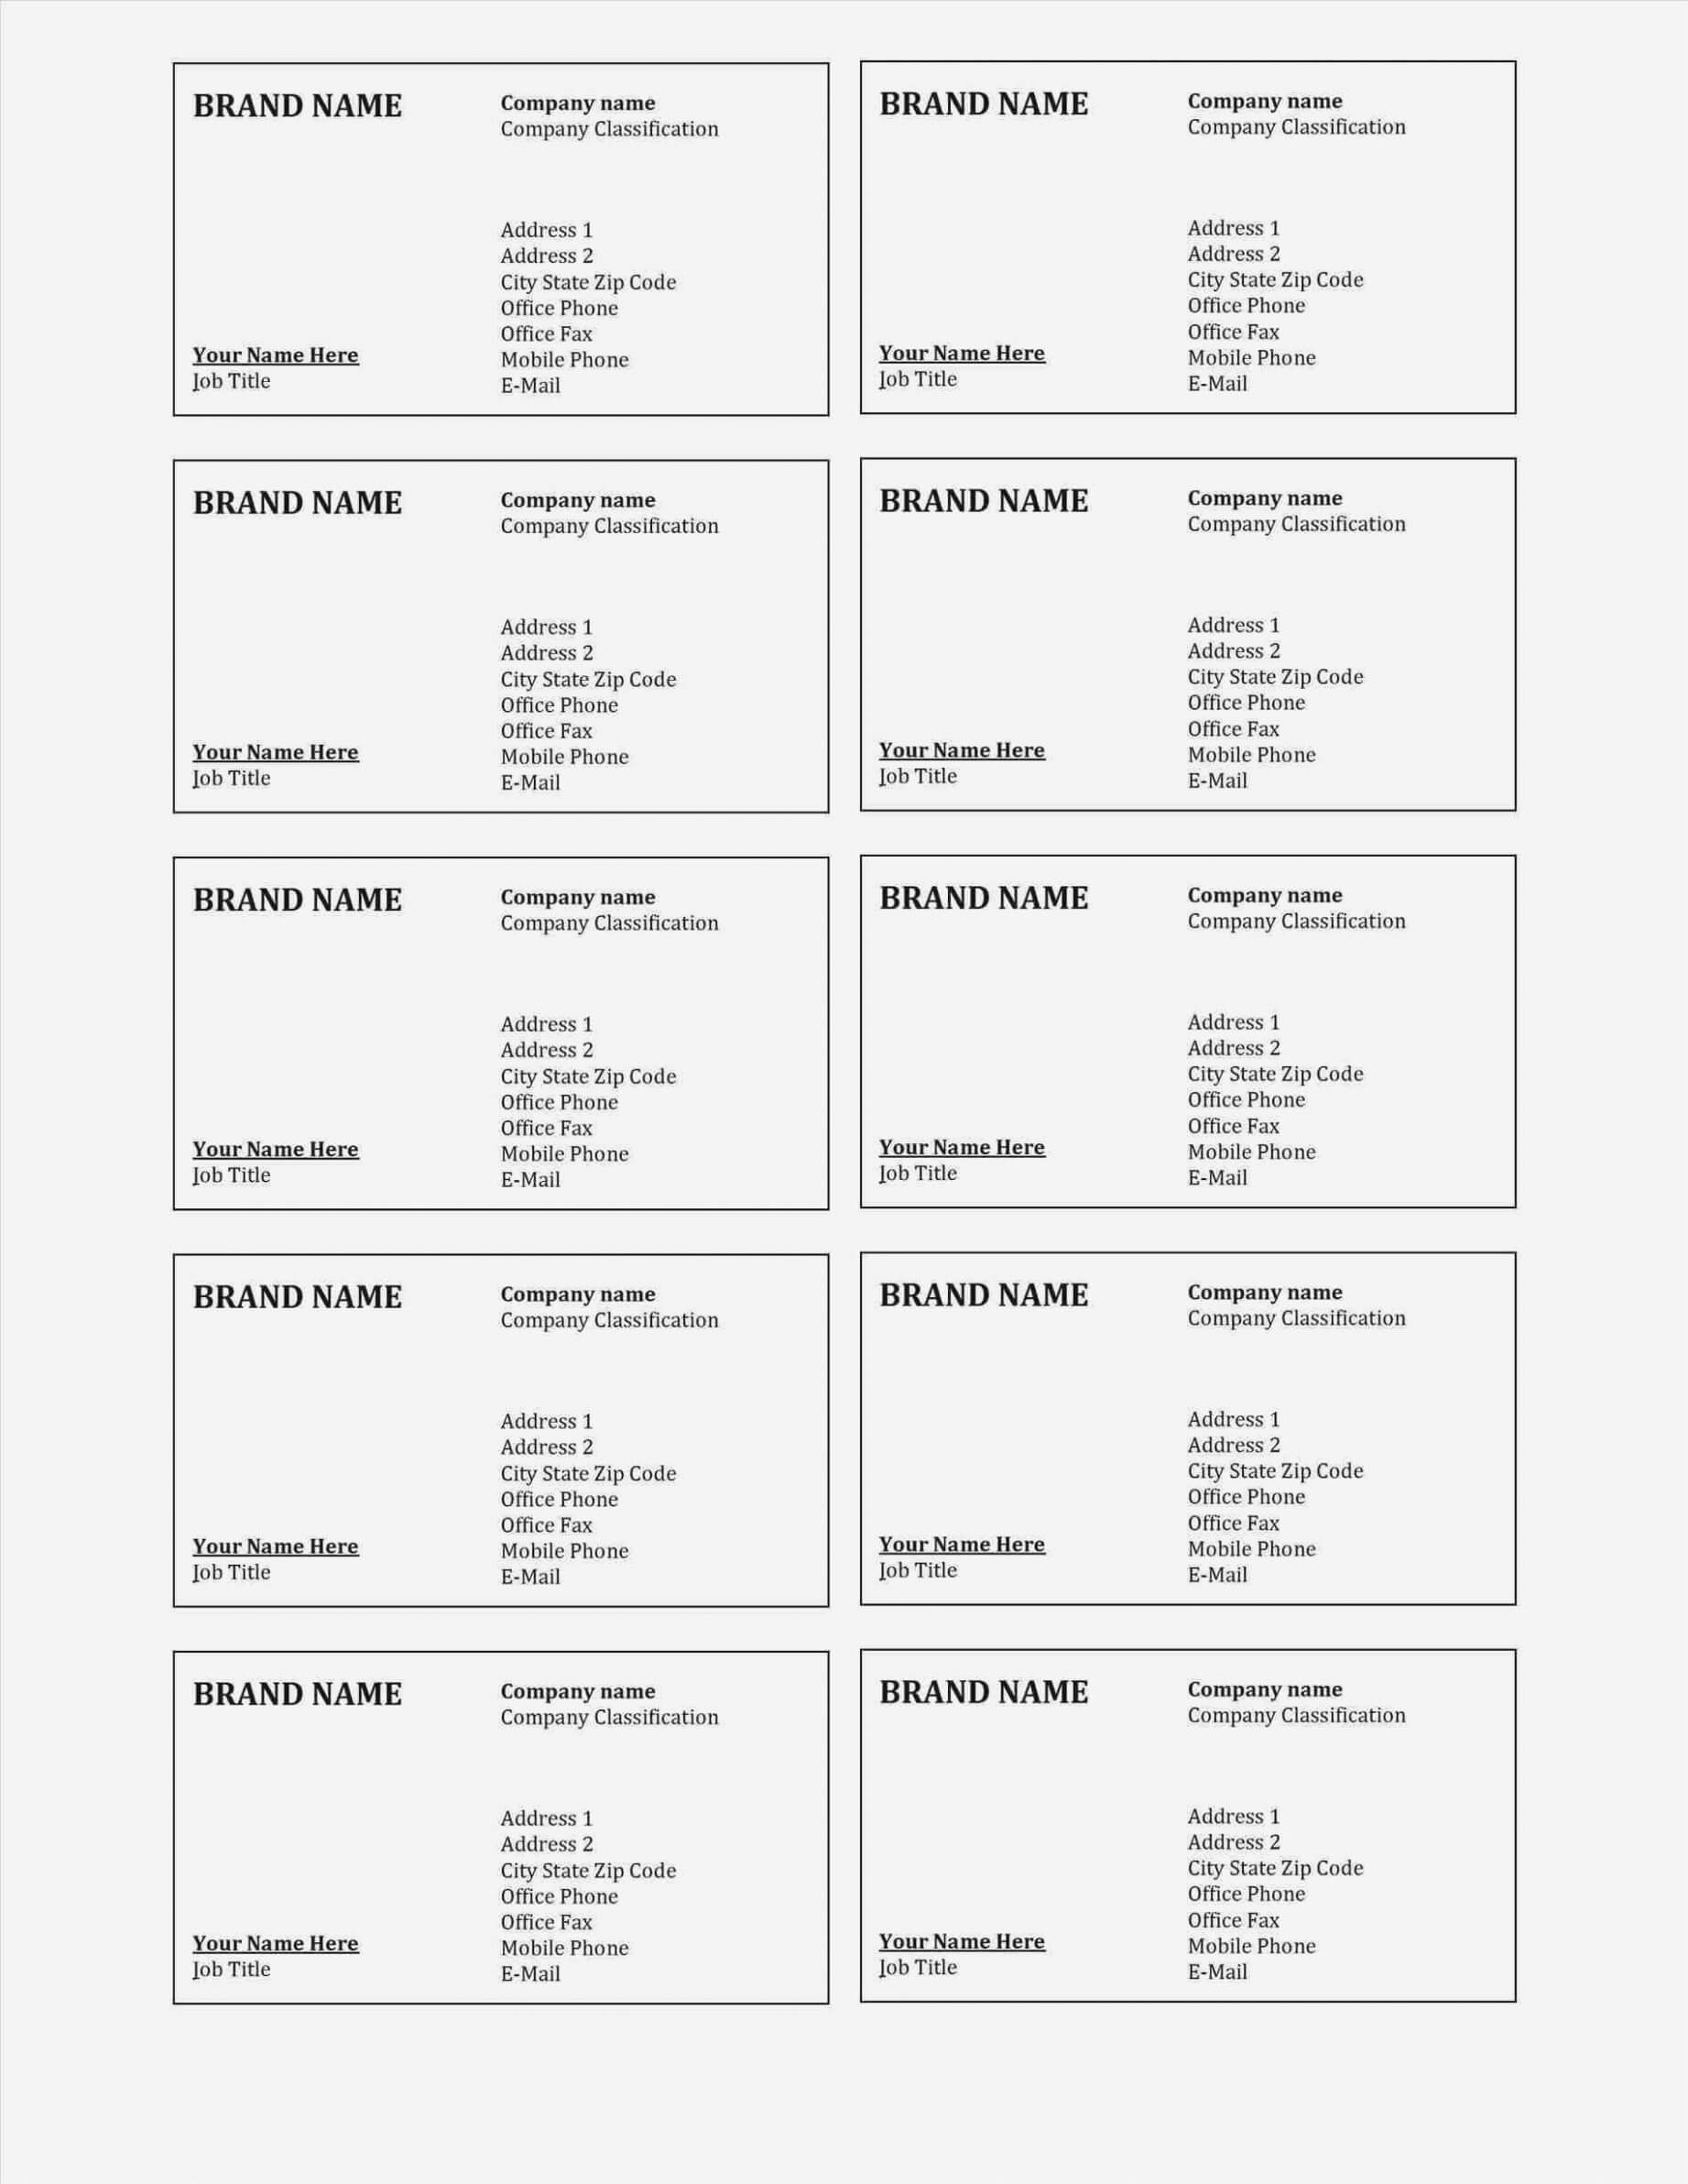 Rhbestbuymastercardnownet Labels Labels 14 Per Sheet Within Labels 8 Per Sheet Template Word